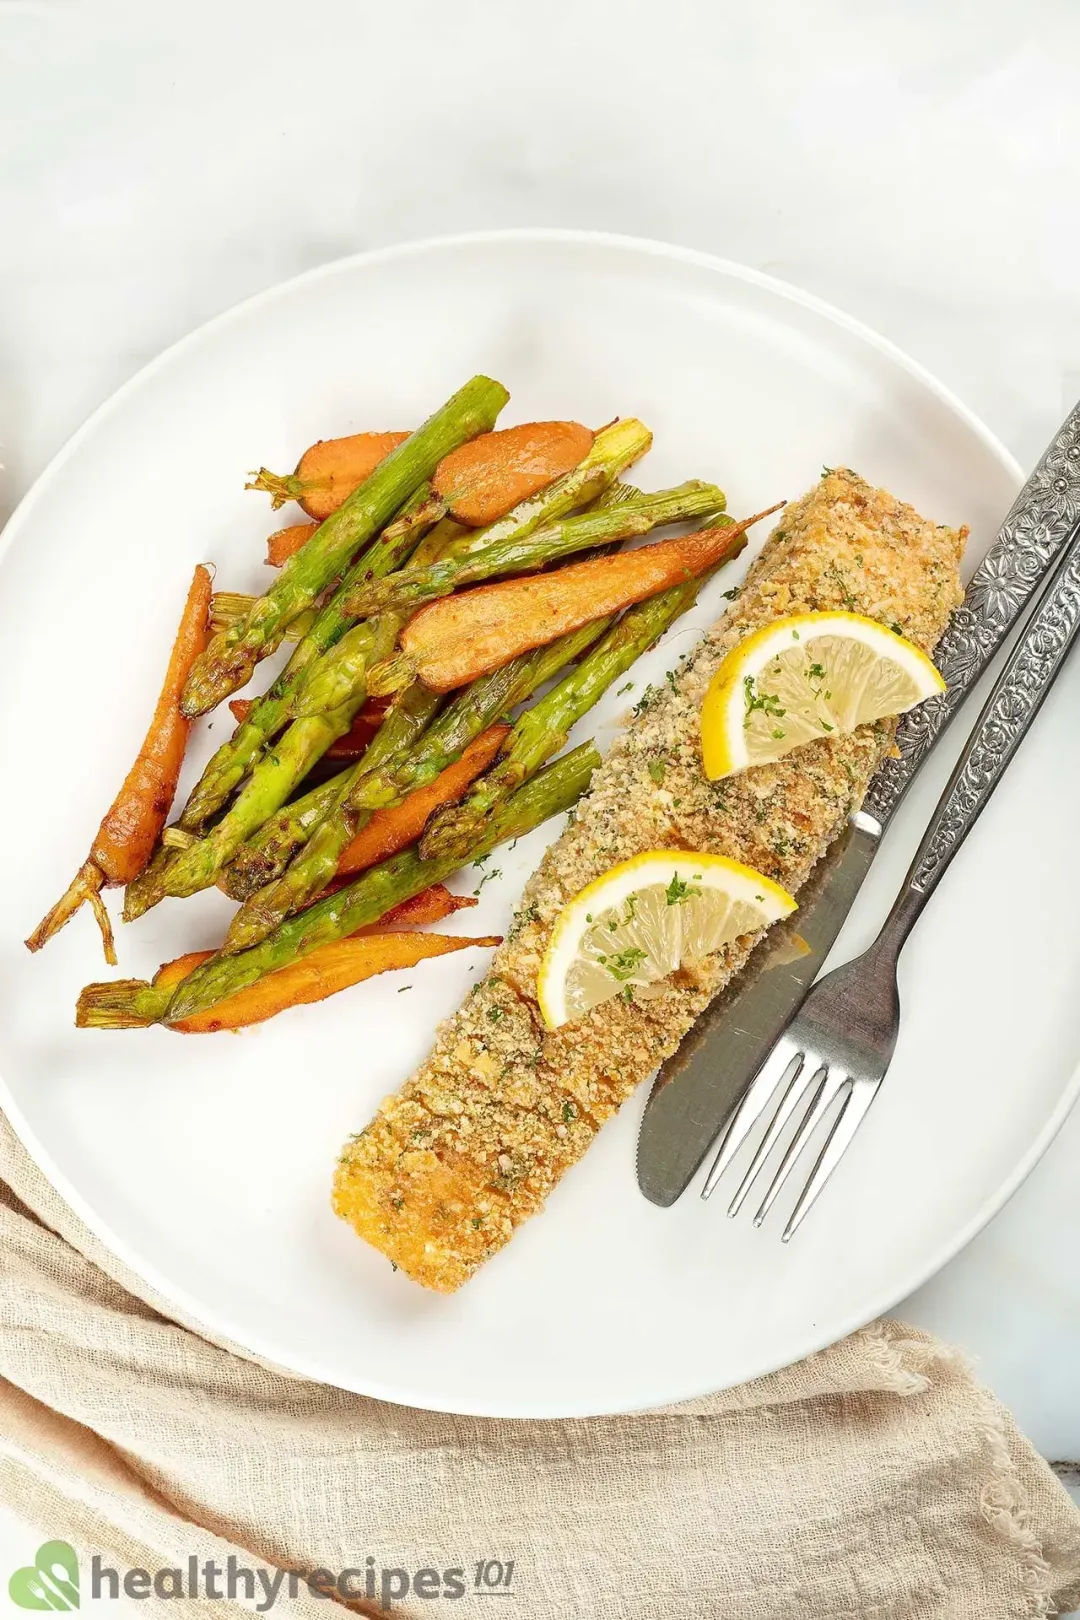 A white plate containing a salmon fillet crusted with breadcrumbs, some baby carrots, asparagus stalks, two lemon pieces, a dinner knife, and a fork